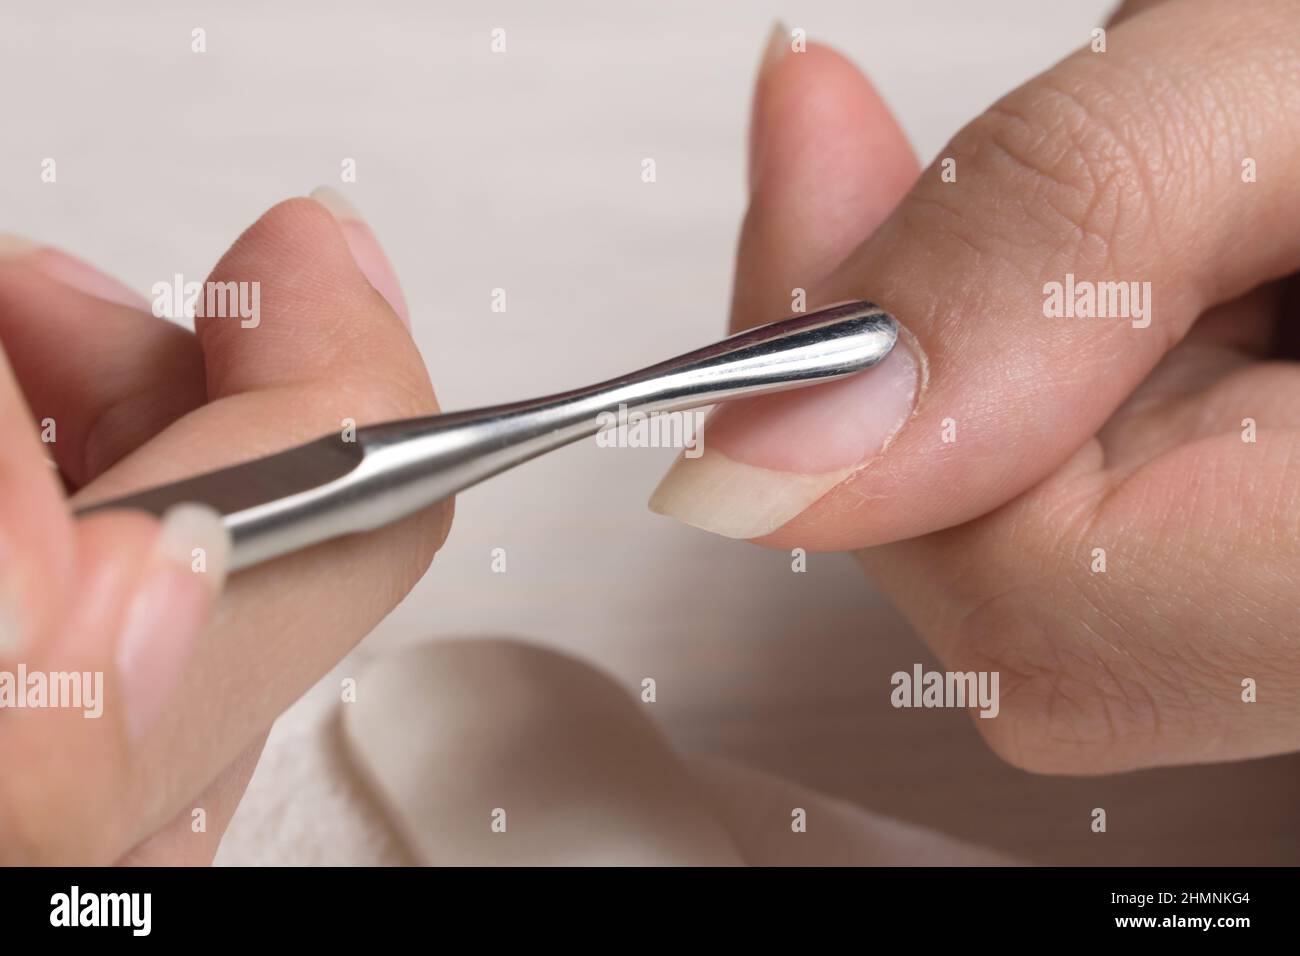 Manicure. Push back the cuticle with a metal pusher. Getting injured during a manicure. Skin care, hygiene. Spa, nail salon. Home care. Beauty. Stock Photo